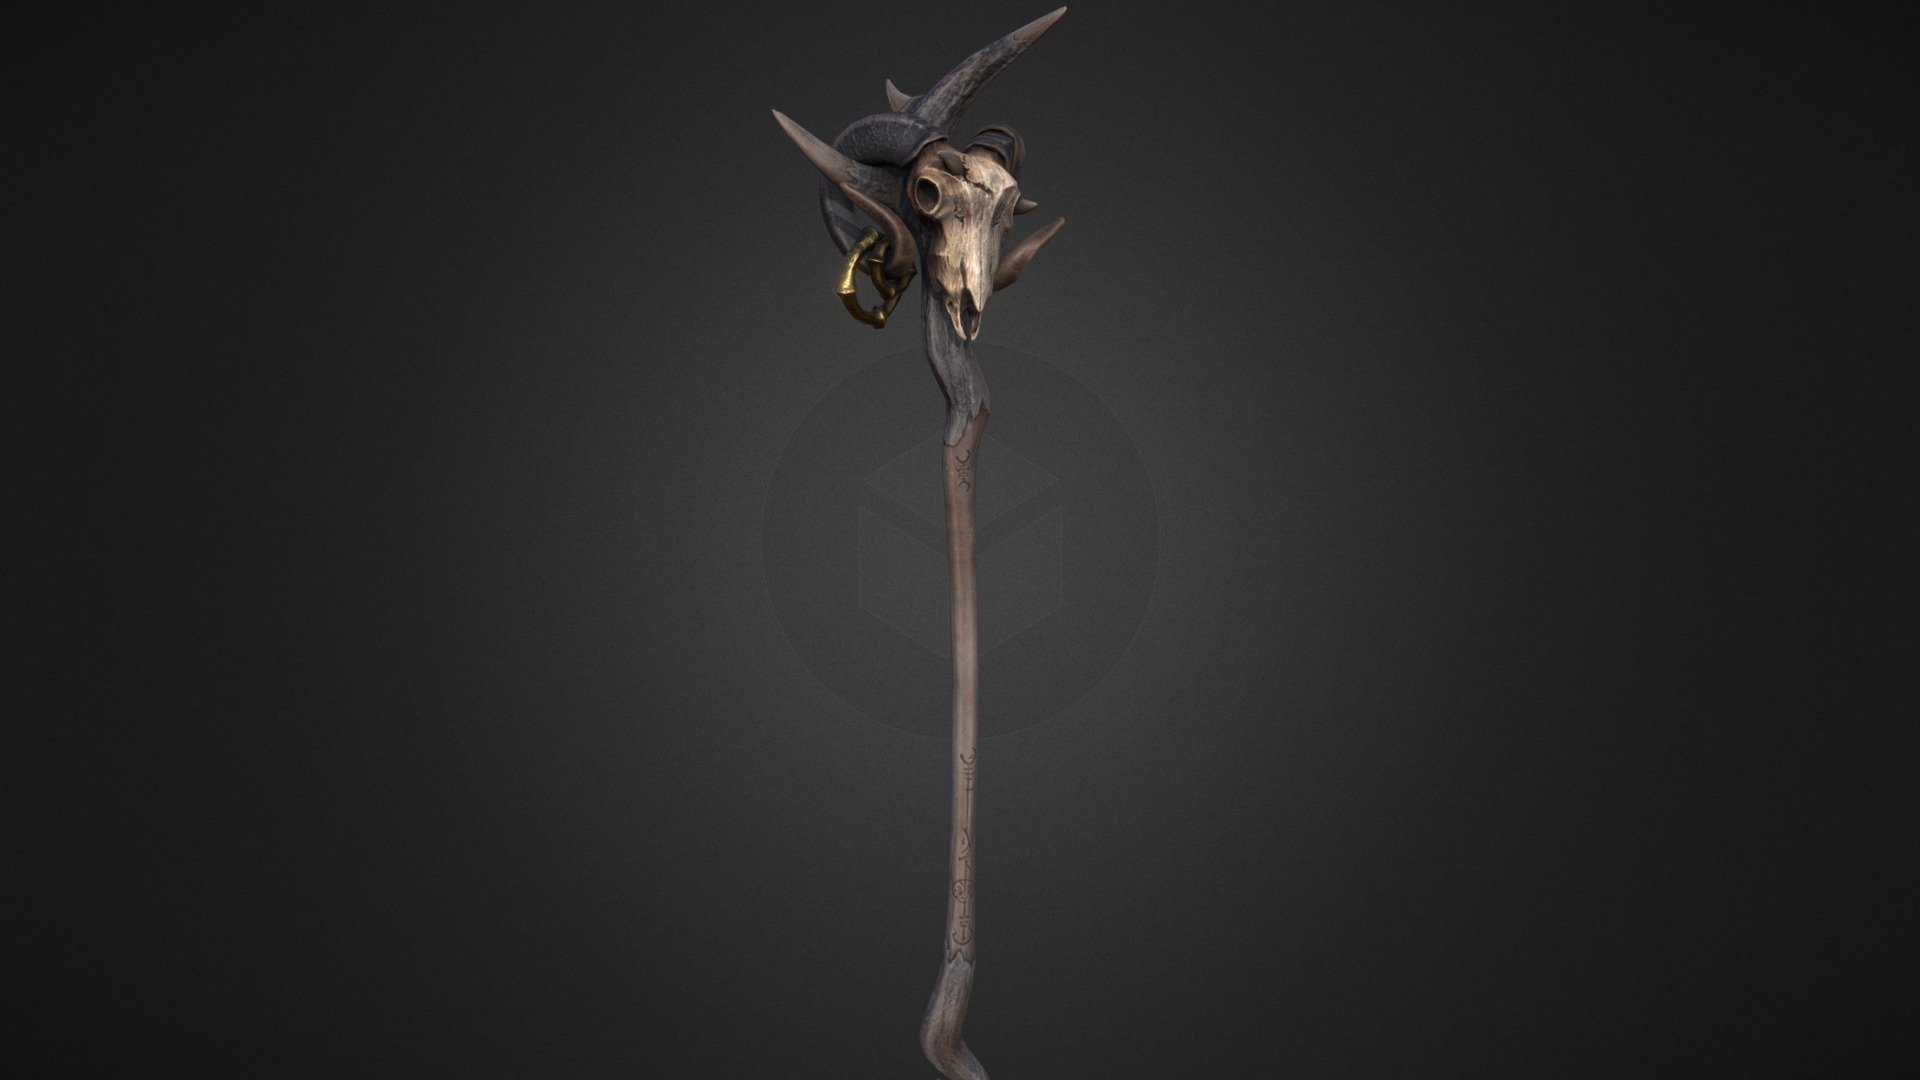 Cultist's staff low poly model.

2k textures. Total polycount 7560 tris.

Model created on Blander and ZBrush. Textured with Substance Painter 3d model